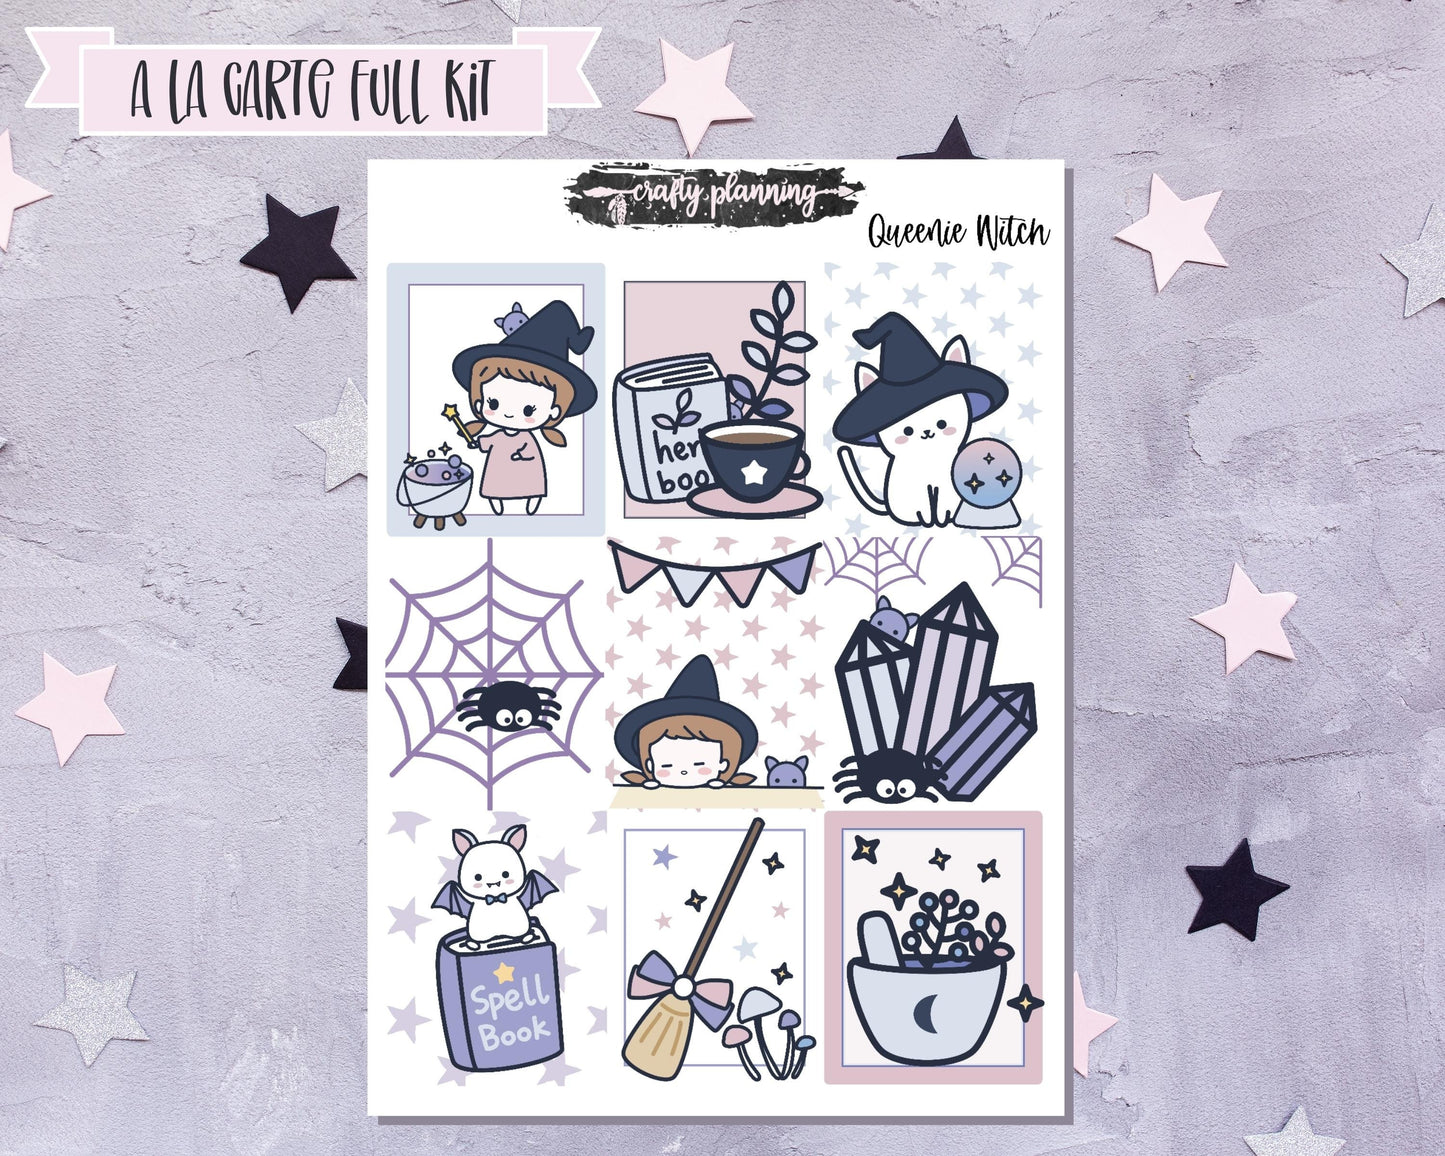 Witchy Stickers, Weekly Planner Kit, Standard Vertical, Witchcraft Stickers, Kawaii Stickers, A La Carte Kit, Deluxe Planner Kit